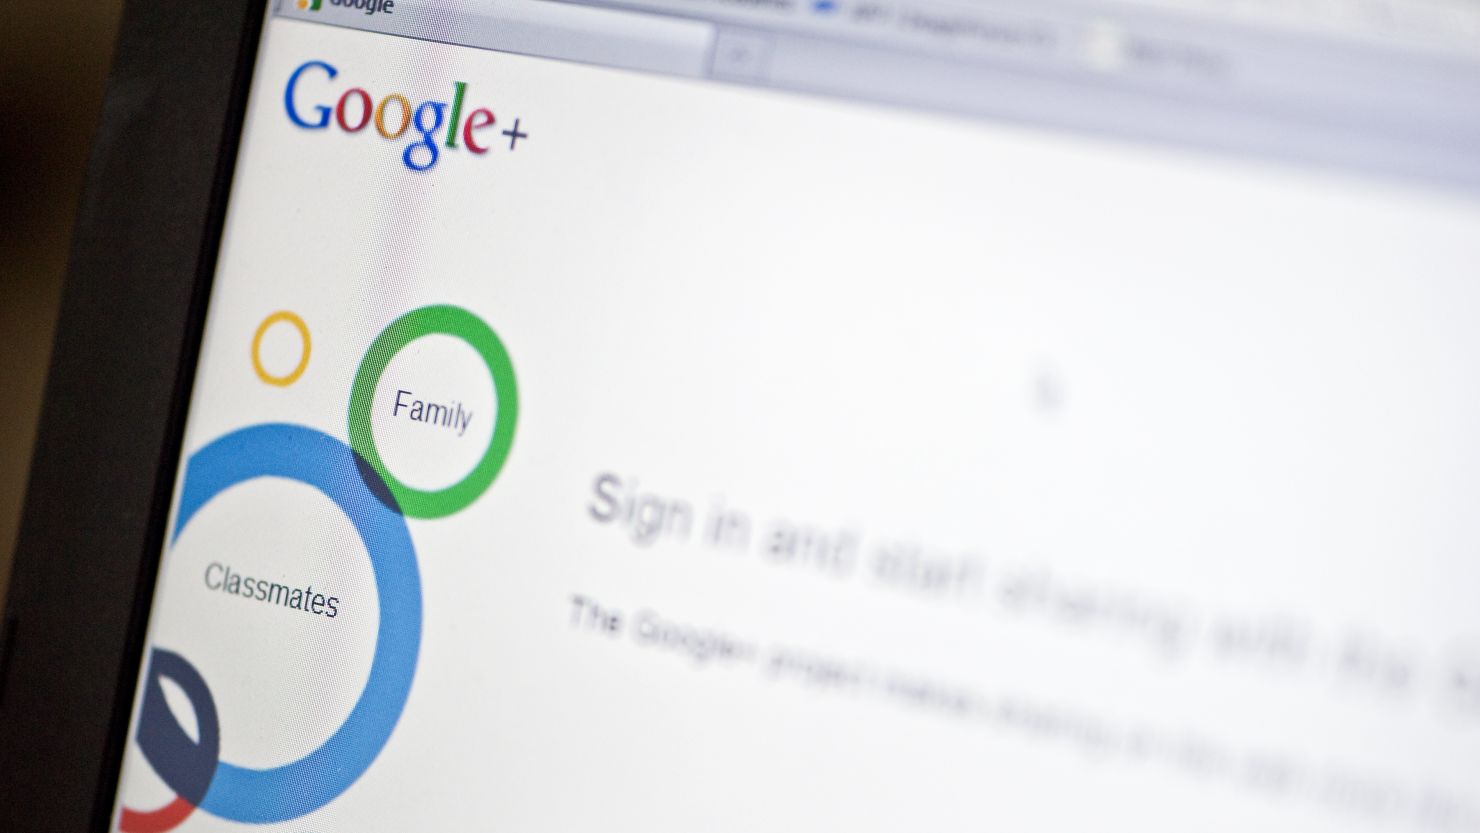 Google launched last year its own social networking site, Google +, as part of efforts to keep up with Facebook.